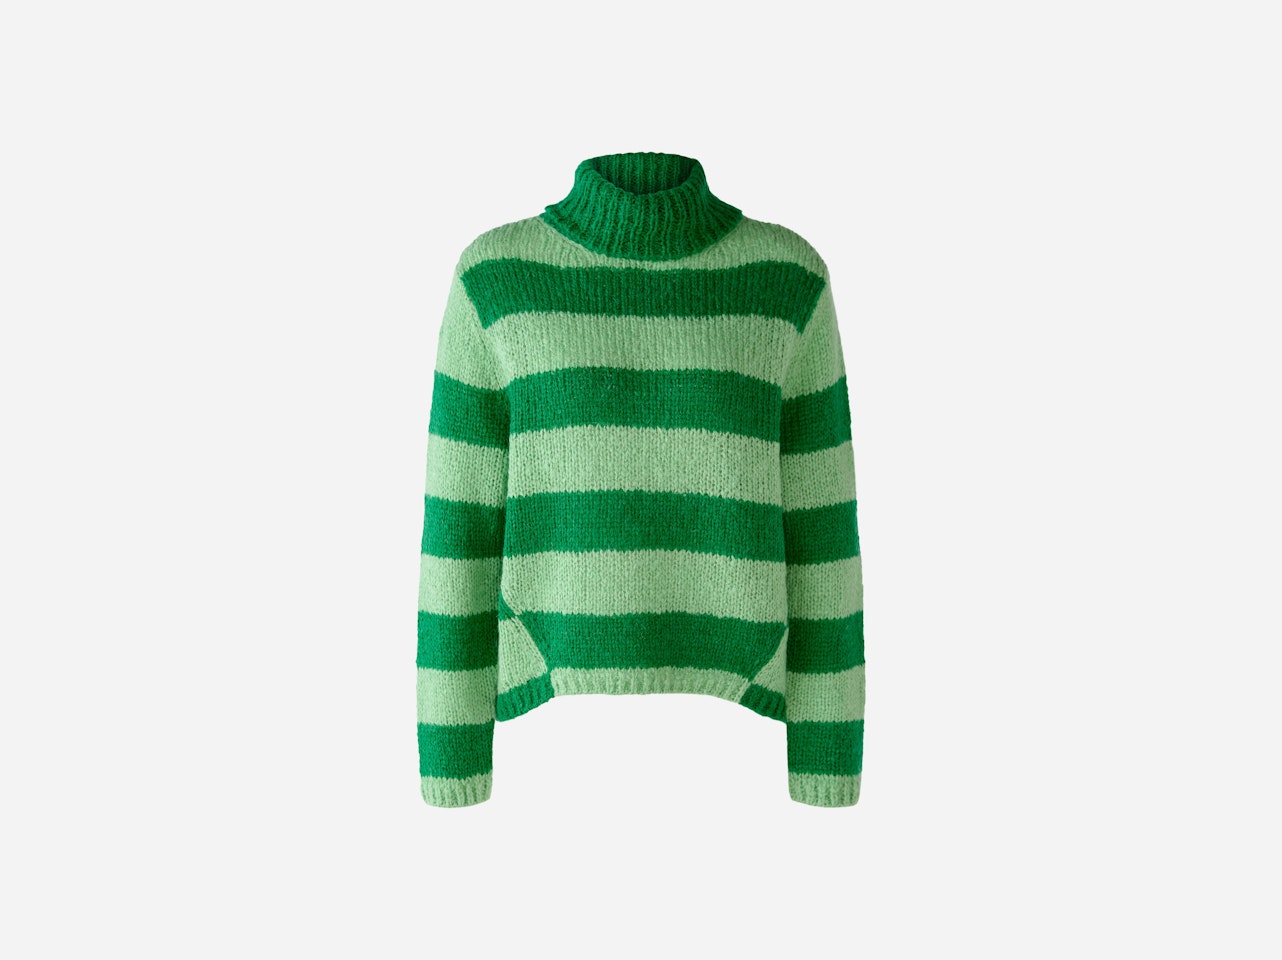 Bild 1 von Jumper with wool and mohair in green green | Oui